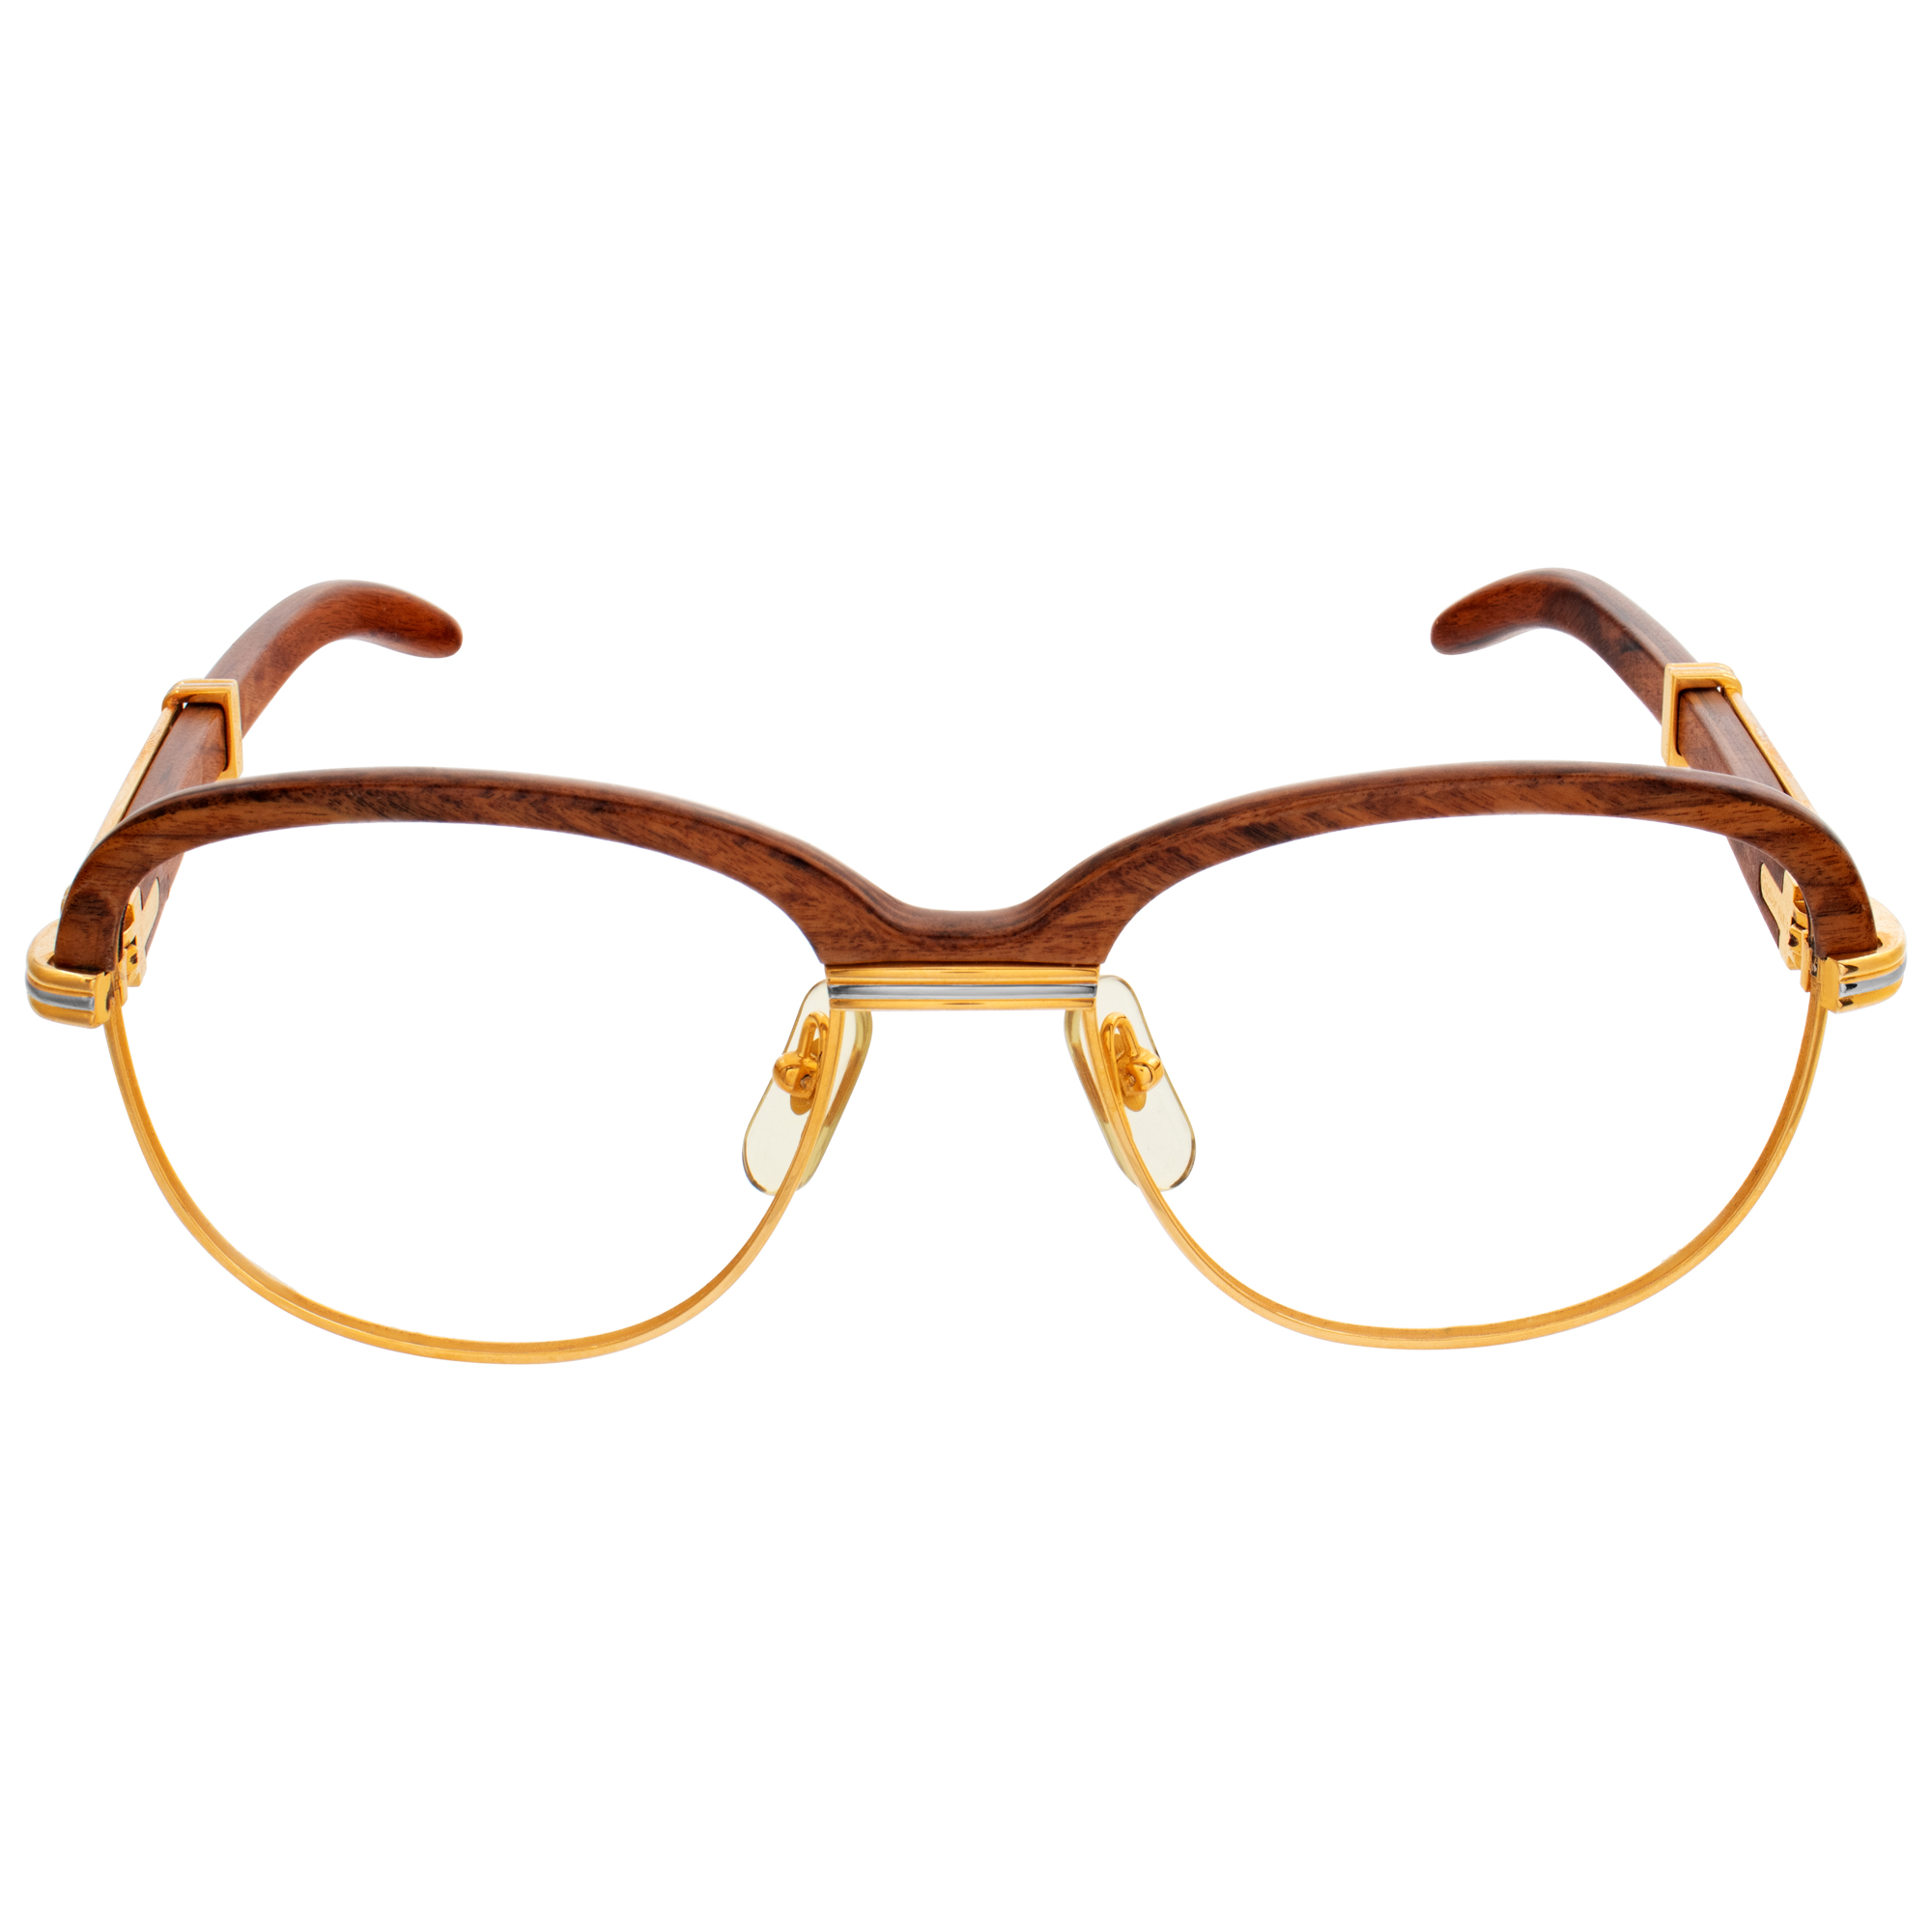 Cartier "Malmaison" collection, Palisander Rosewood & gold glasses. Circa 1990